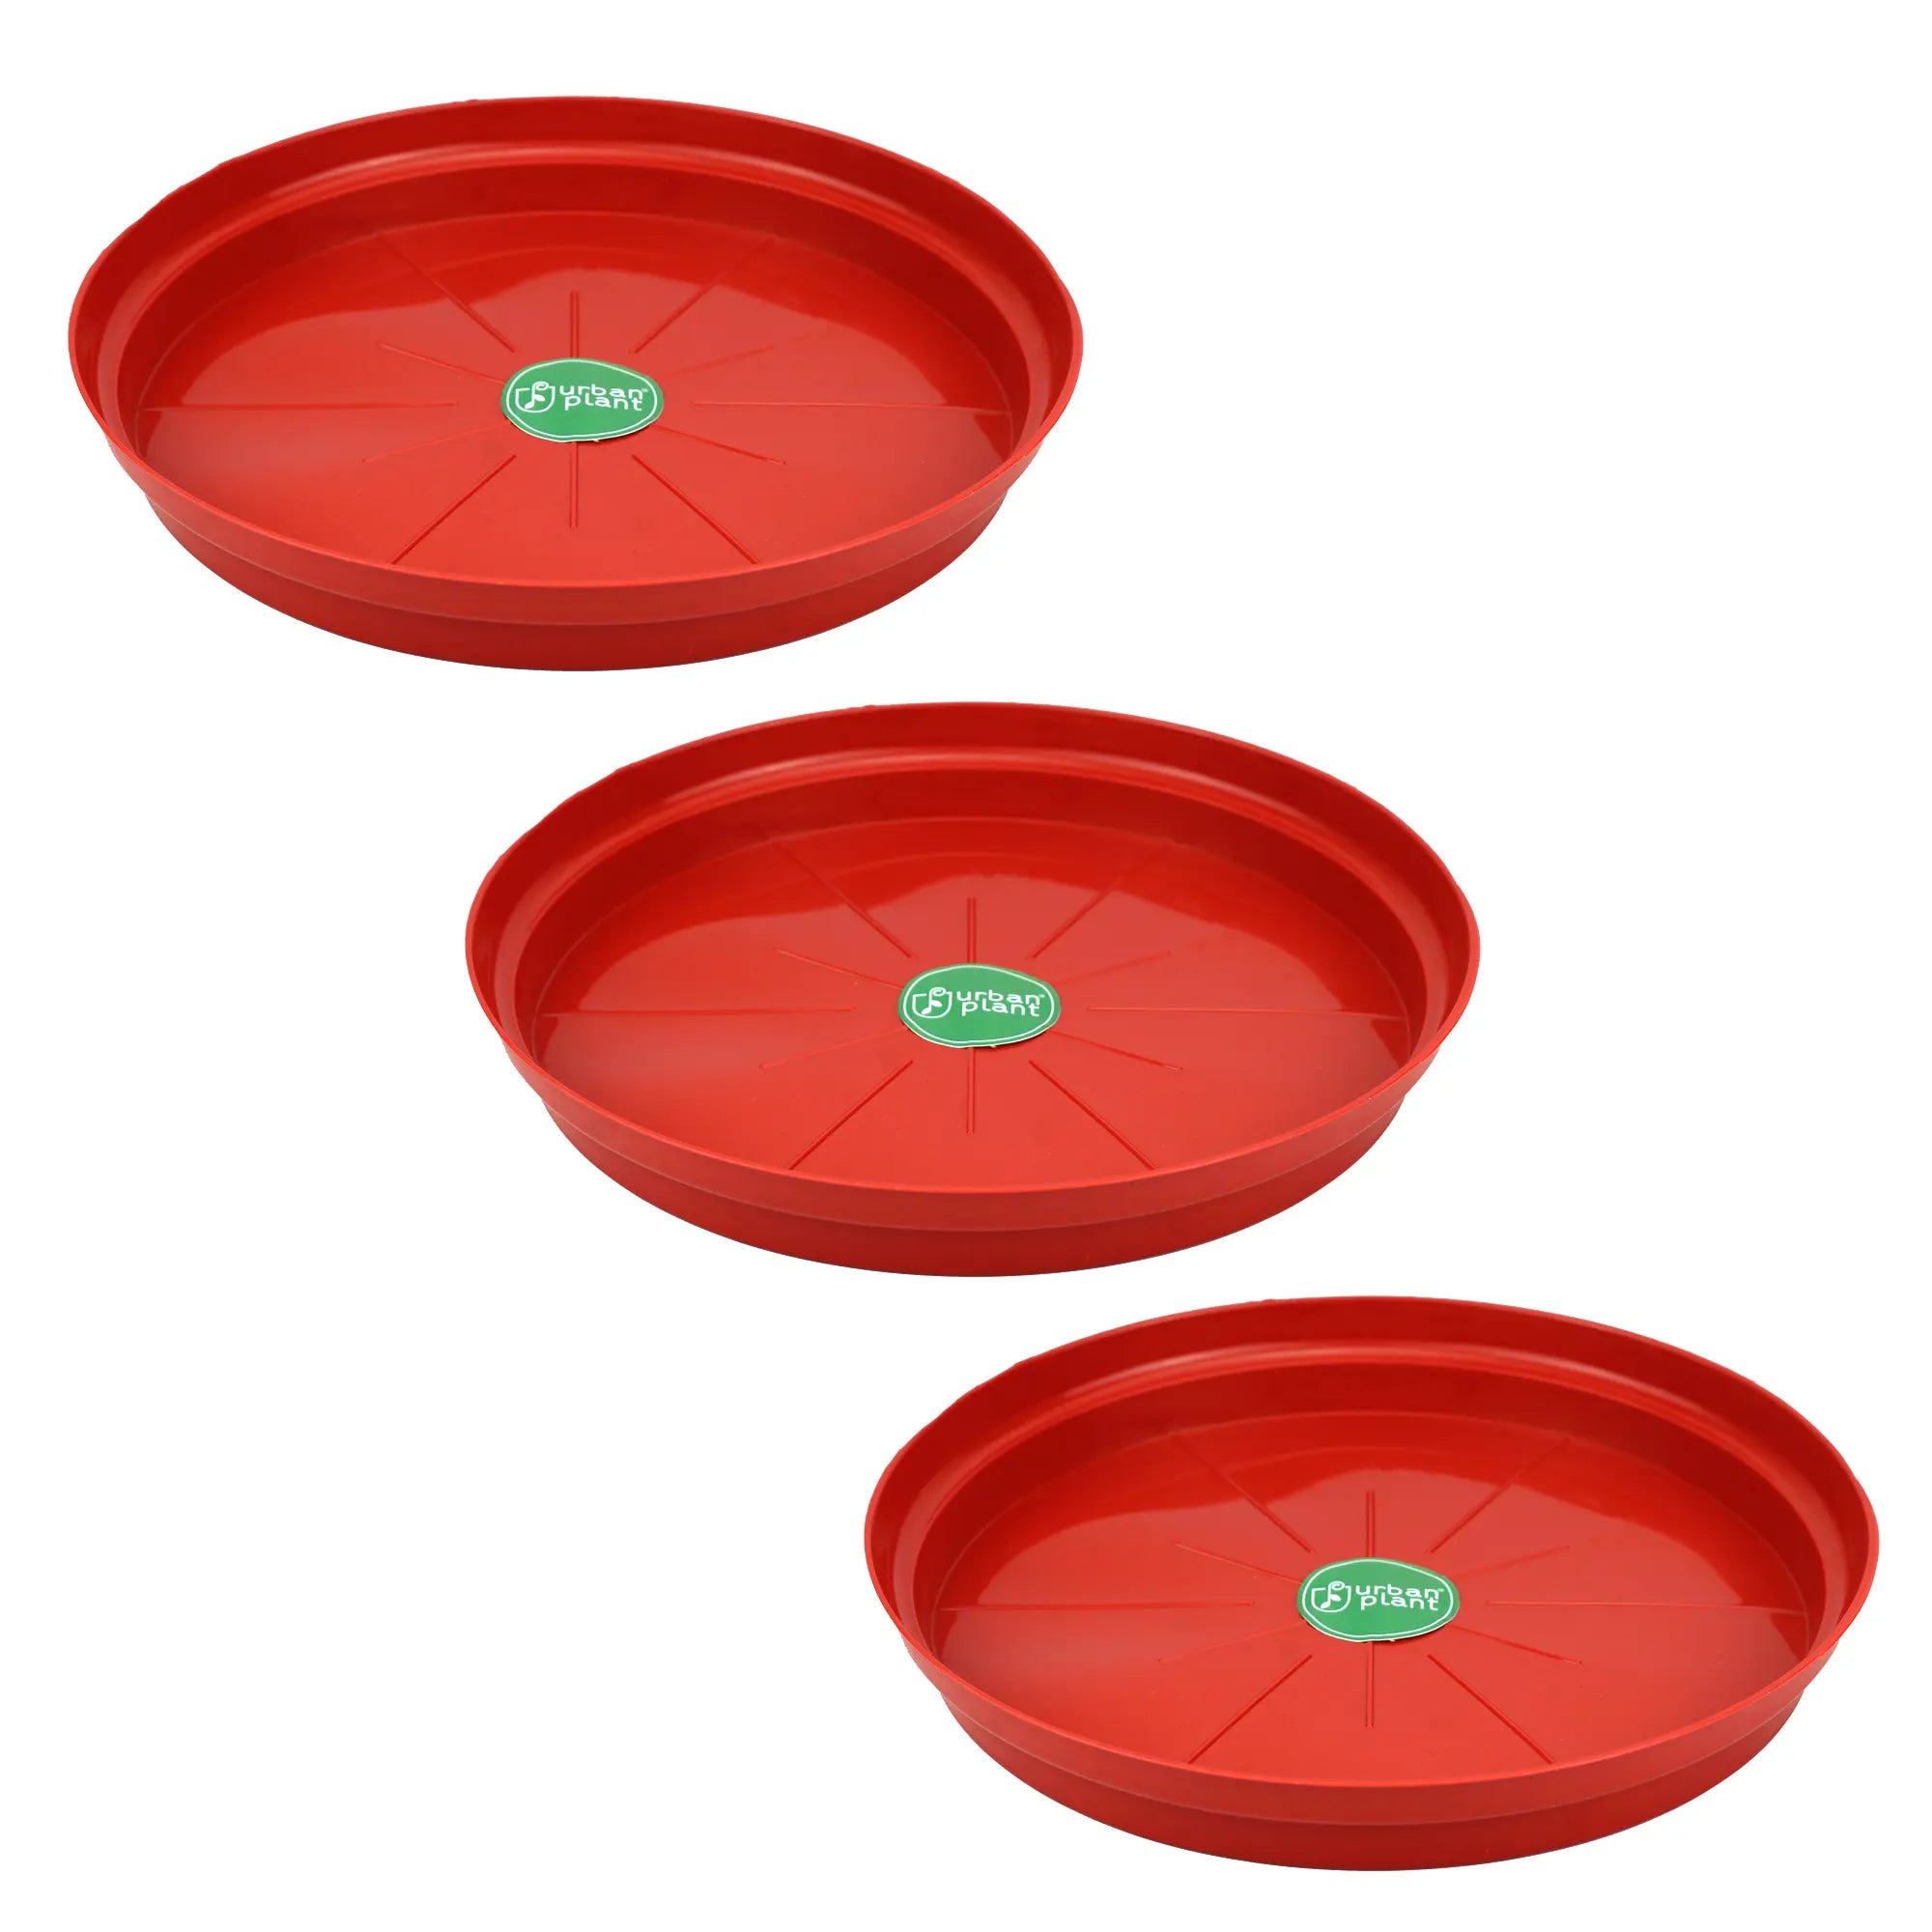 Urban Plant Round Bottom Tray (Plate/Saucer) for All Type of Pots Urban Plant 8 Inch Set of 3 